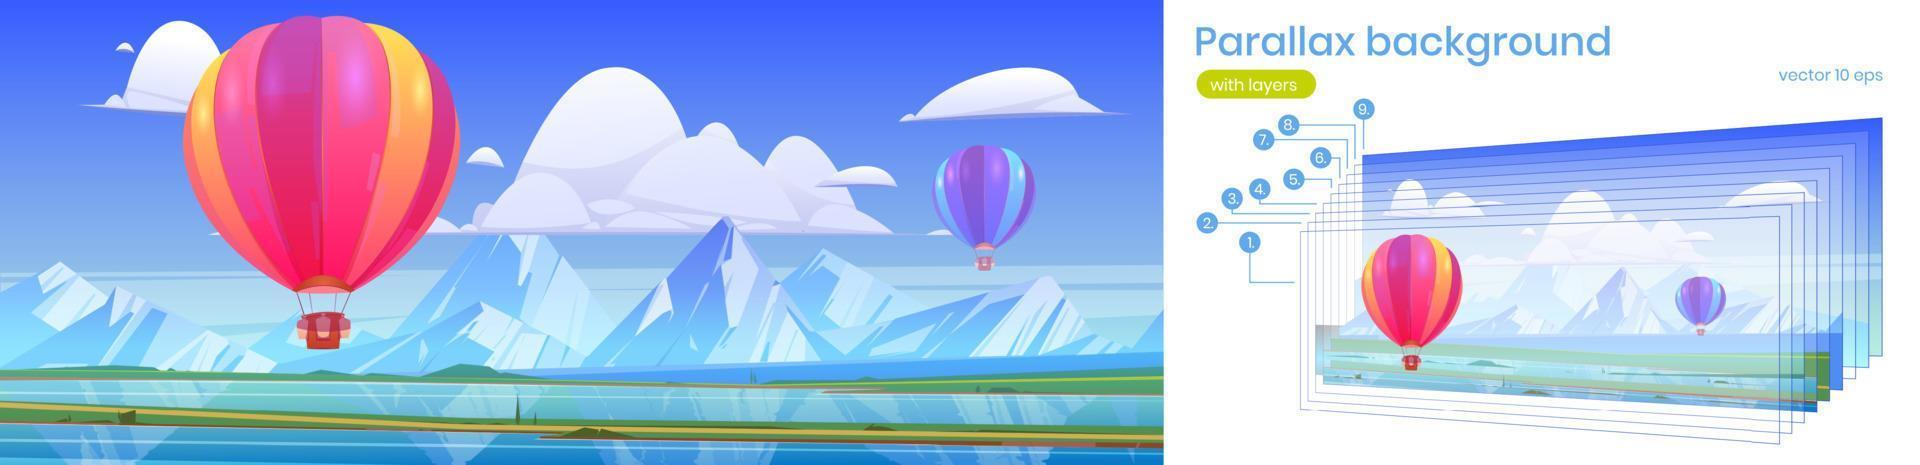 Parallax game background with hot air balloons vector